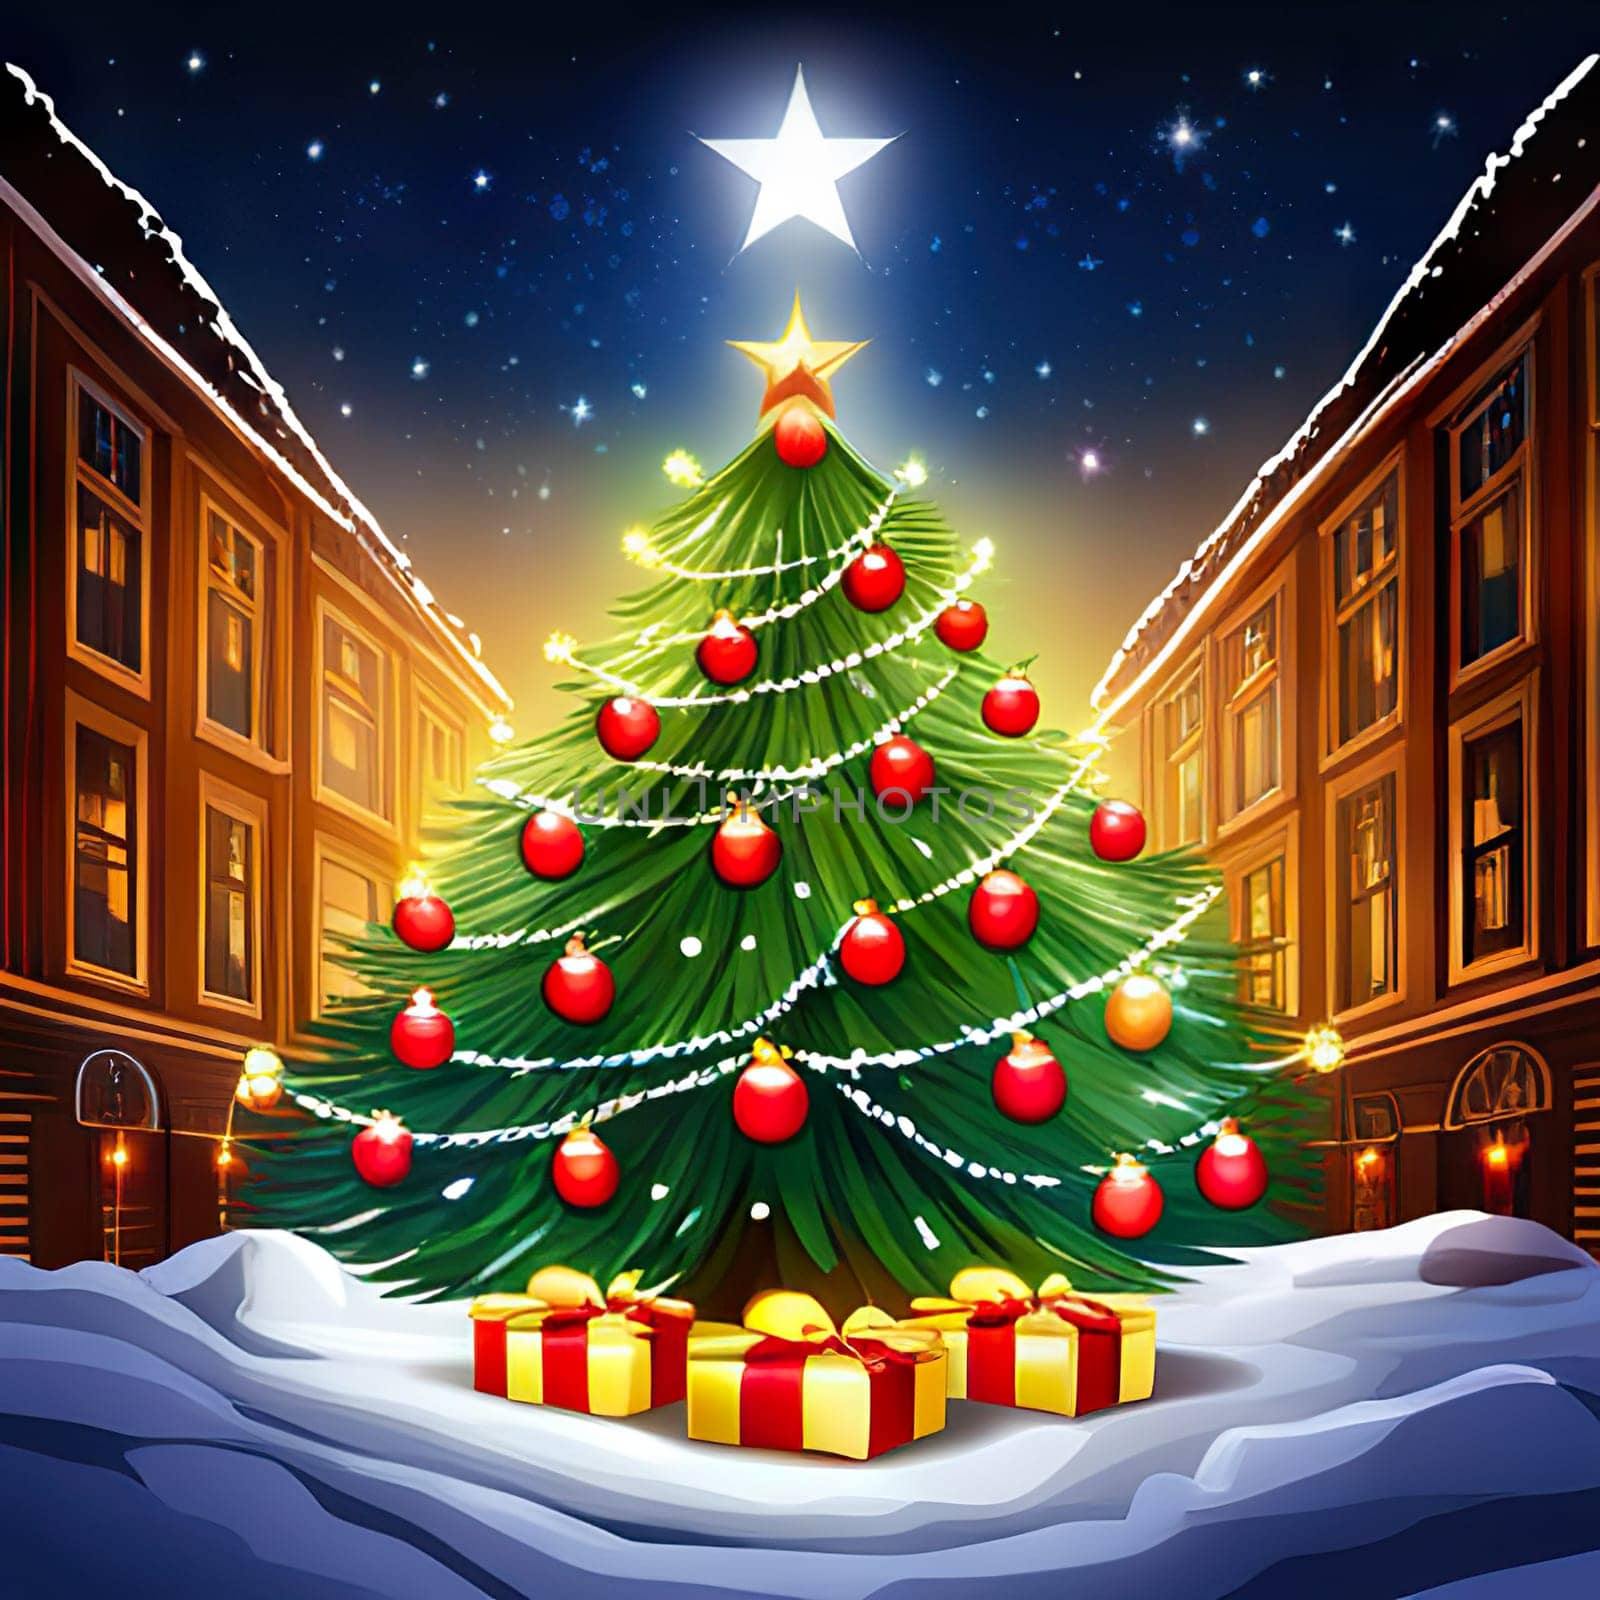 Christmas greeting card with graphic Christmas tree, colored background